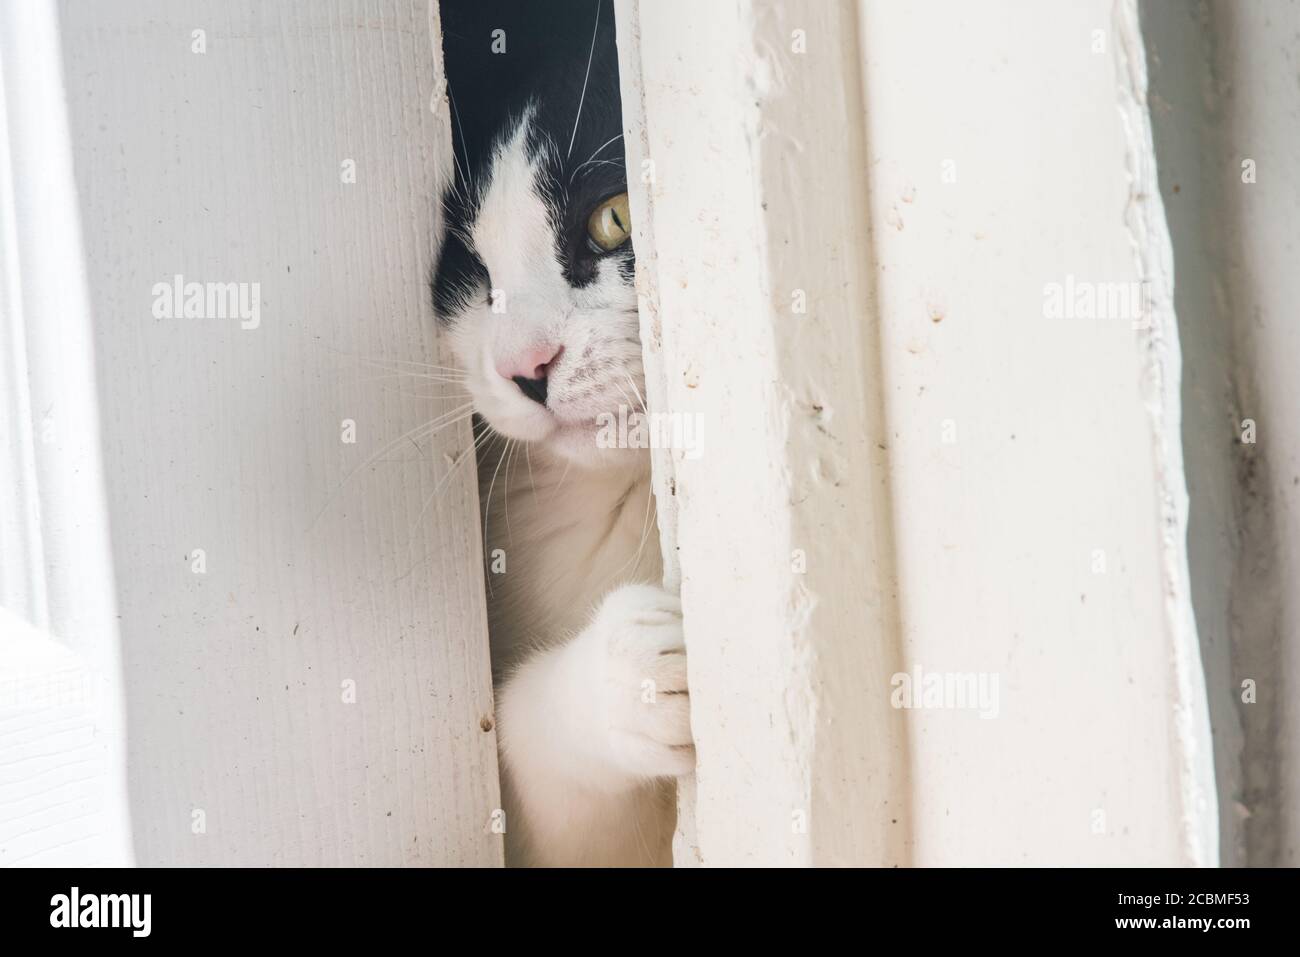 A curious cat peeking through a crack left by a partially open door. The indoor cat curiously watches the outdoors. Stock Photo